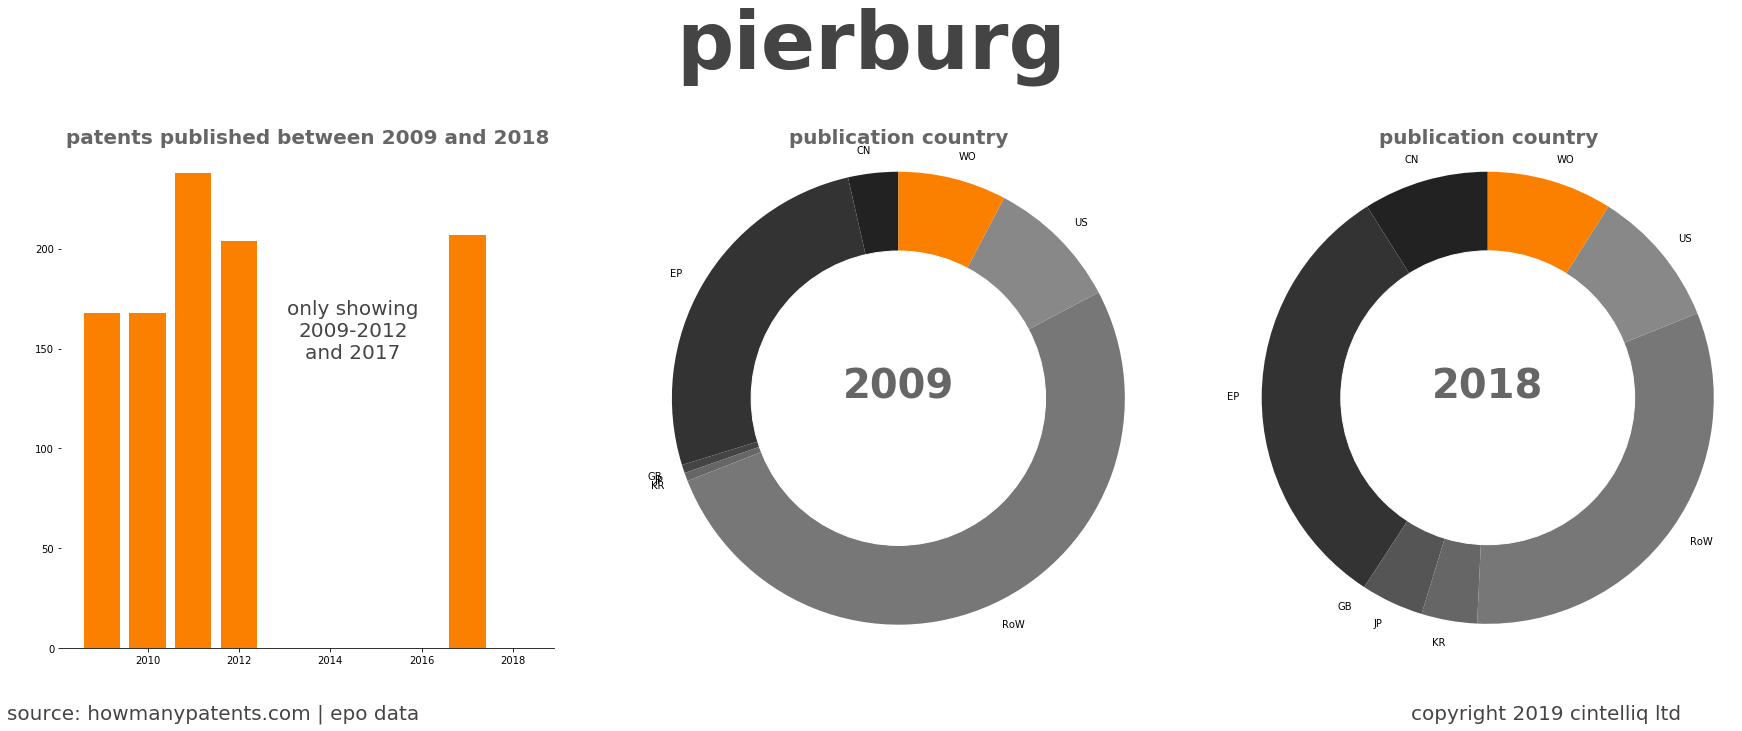 summary of patents for Pierburg